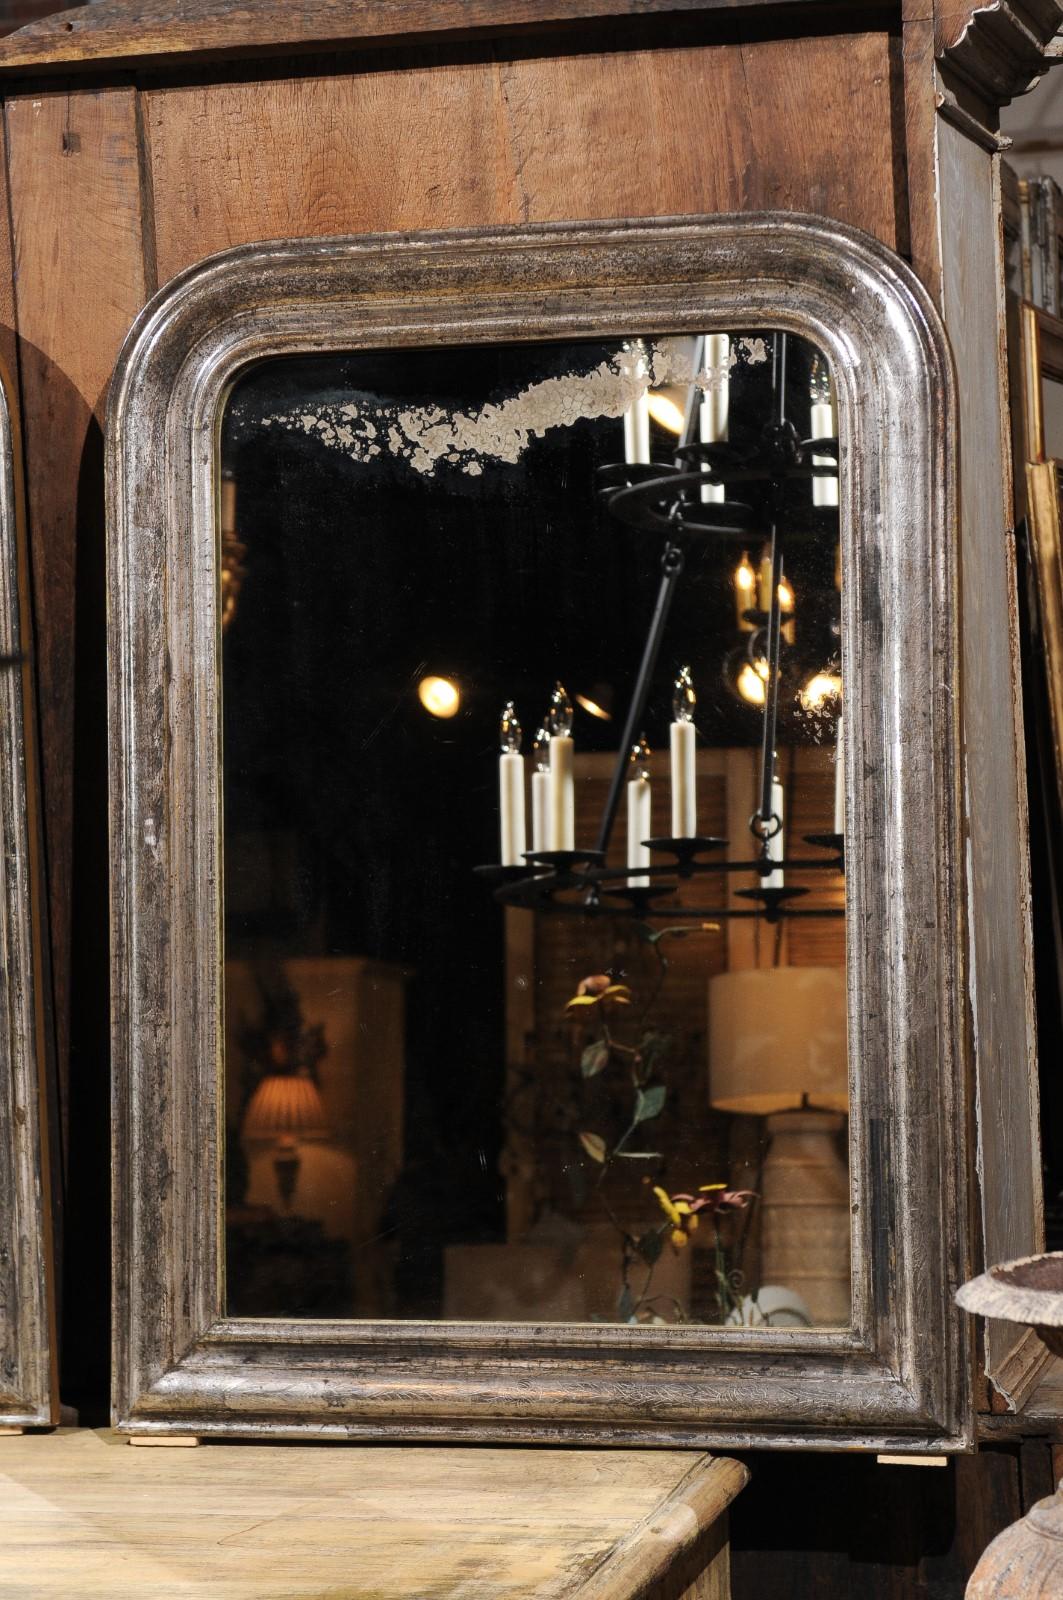 Pair of French Silver Gilt Louis-Philippe 19th Century Mirrors with Aged Patina (Französisch)